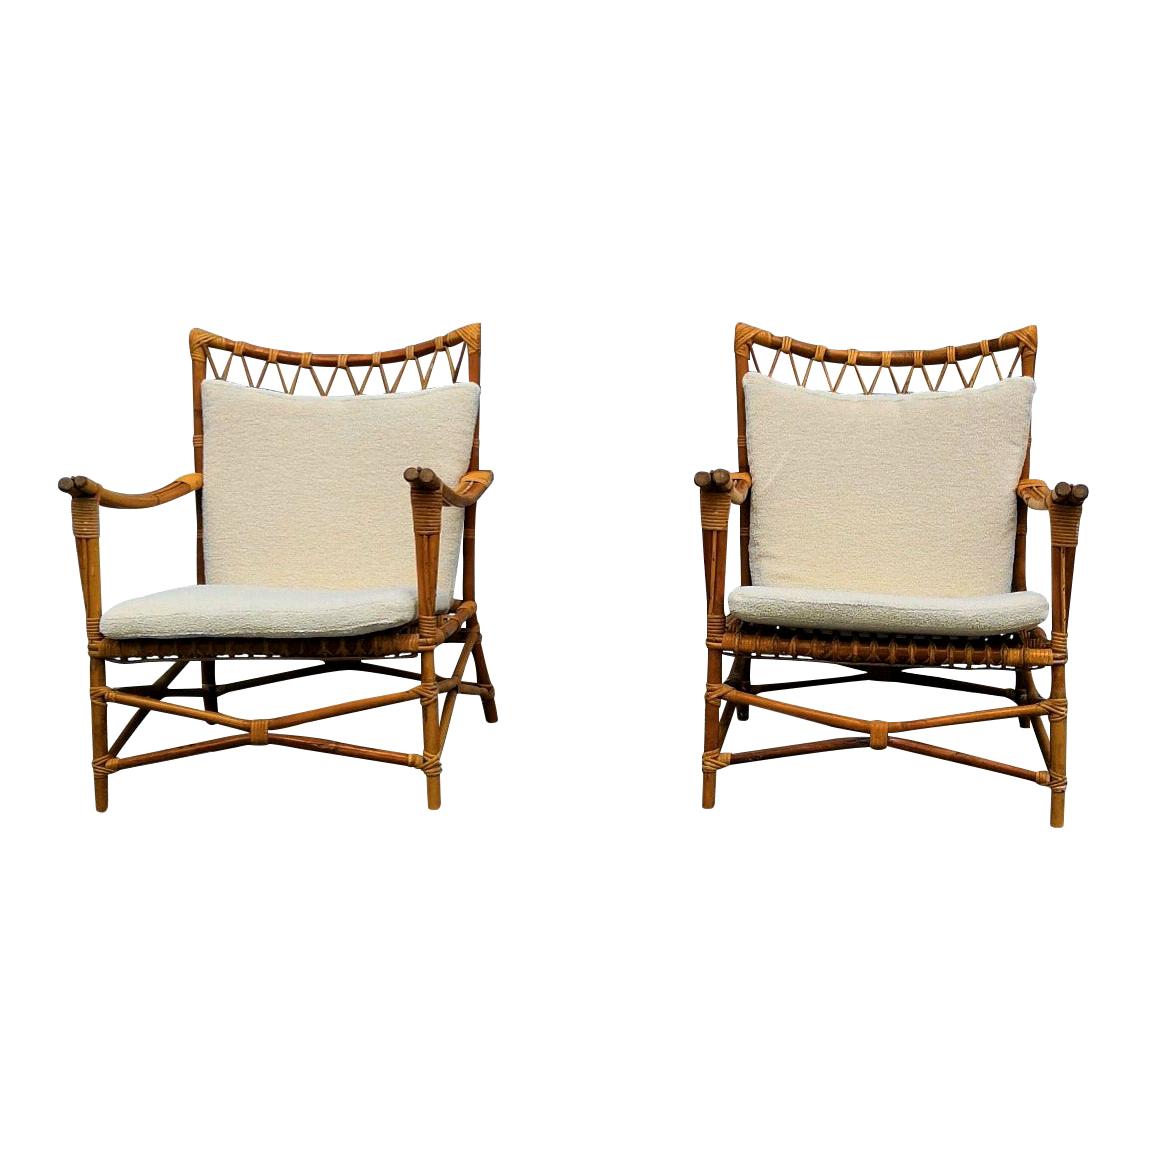 Pair of Bamboo and Rattan Armchairs, France, 1960s